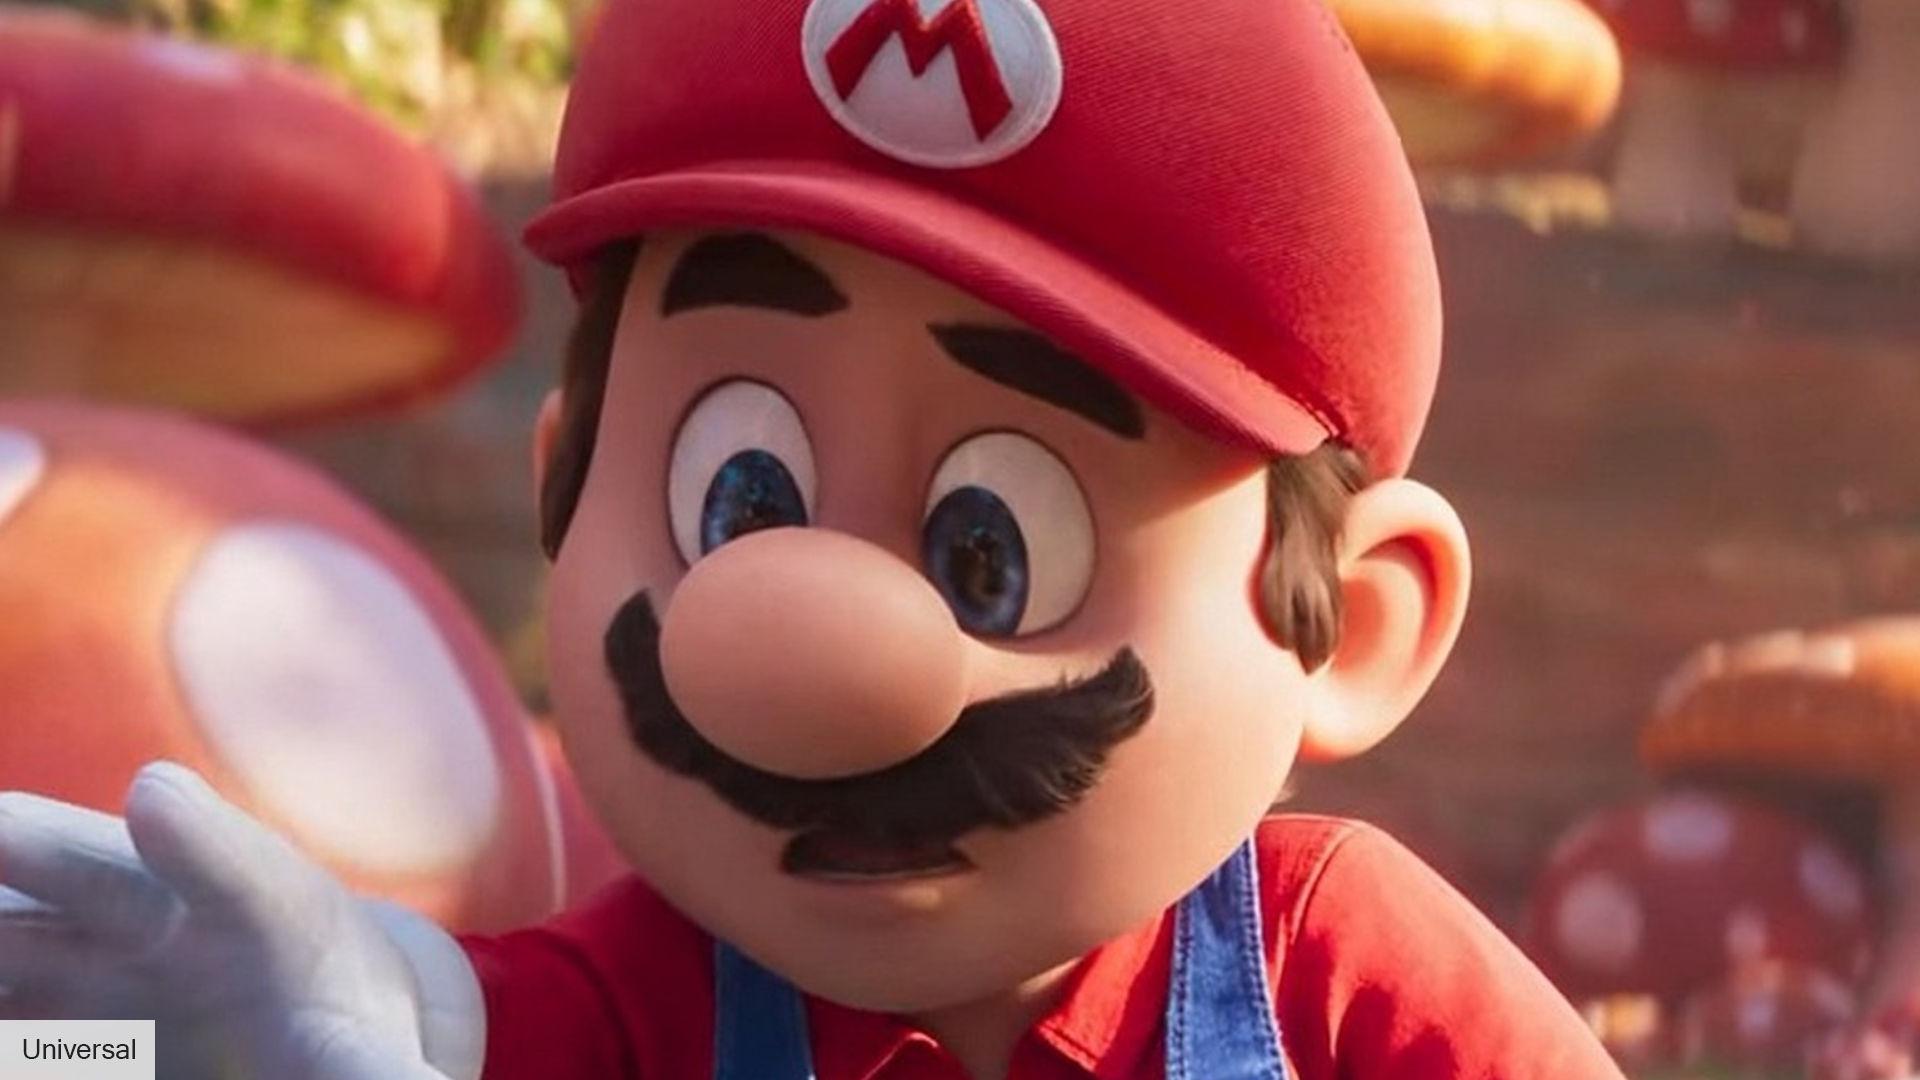 Super Mario Movie 2 release date speculation, cast, plot, and news